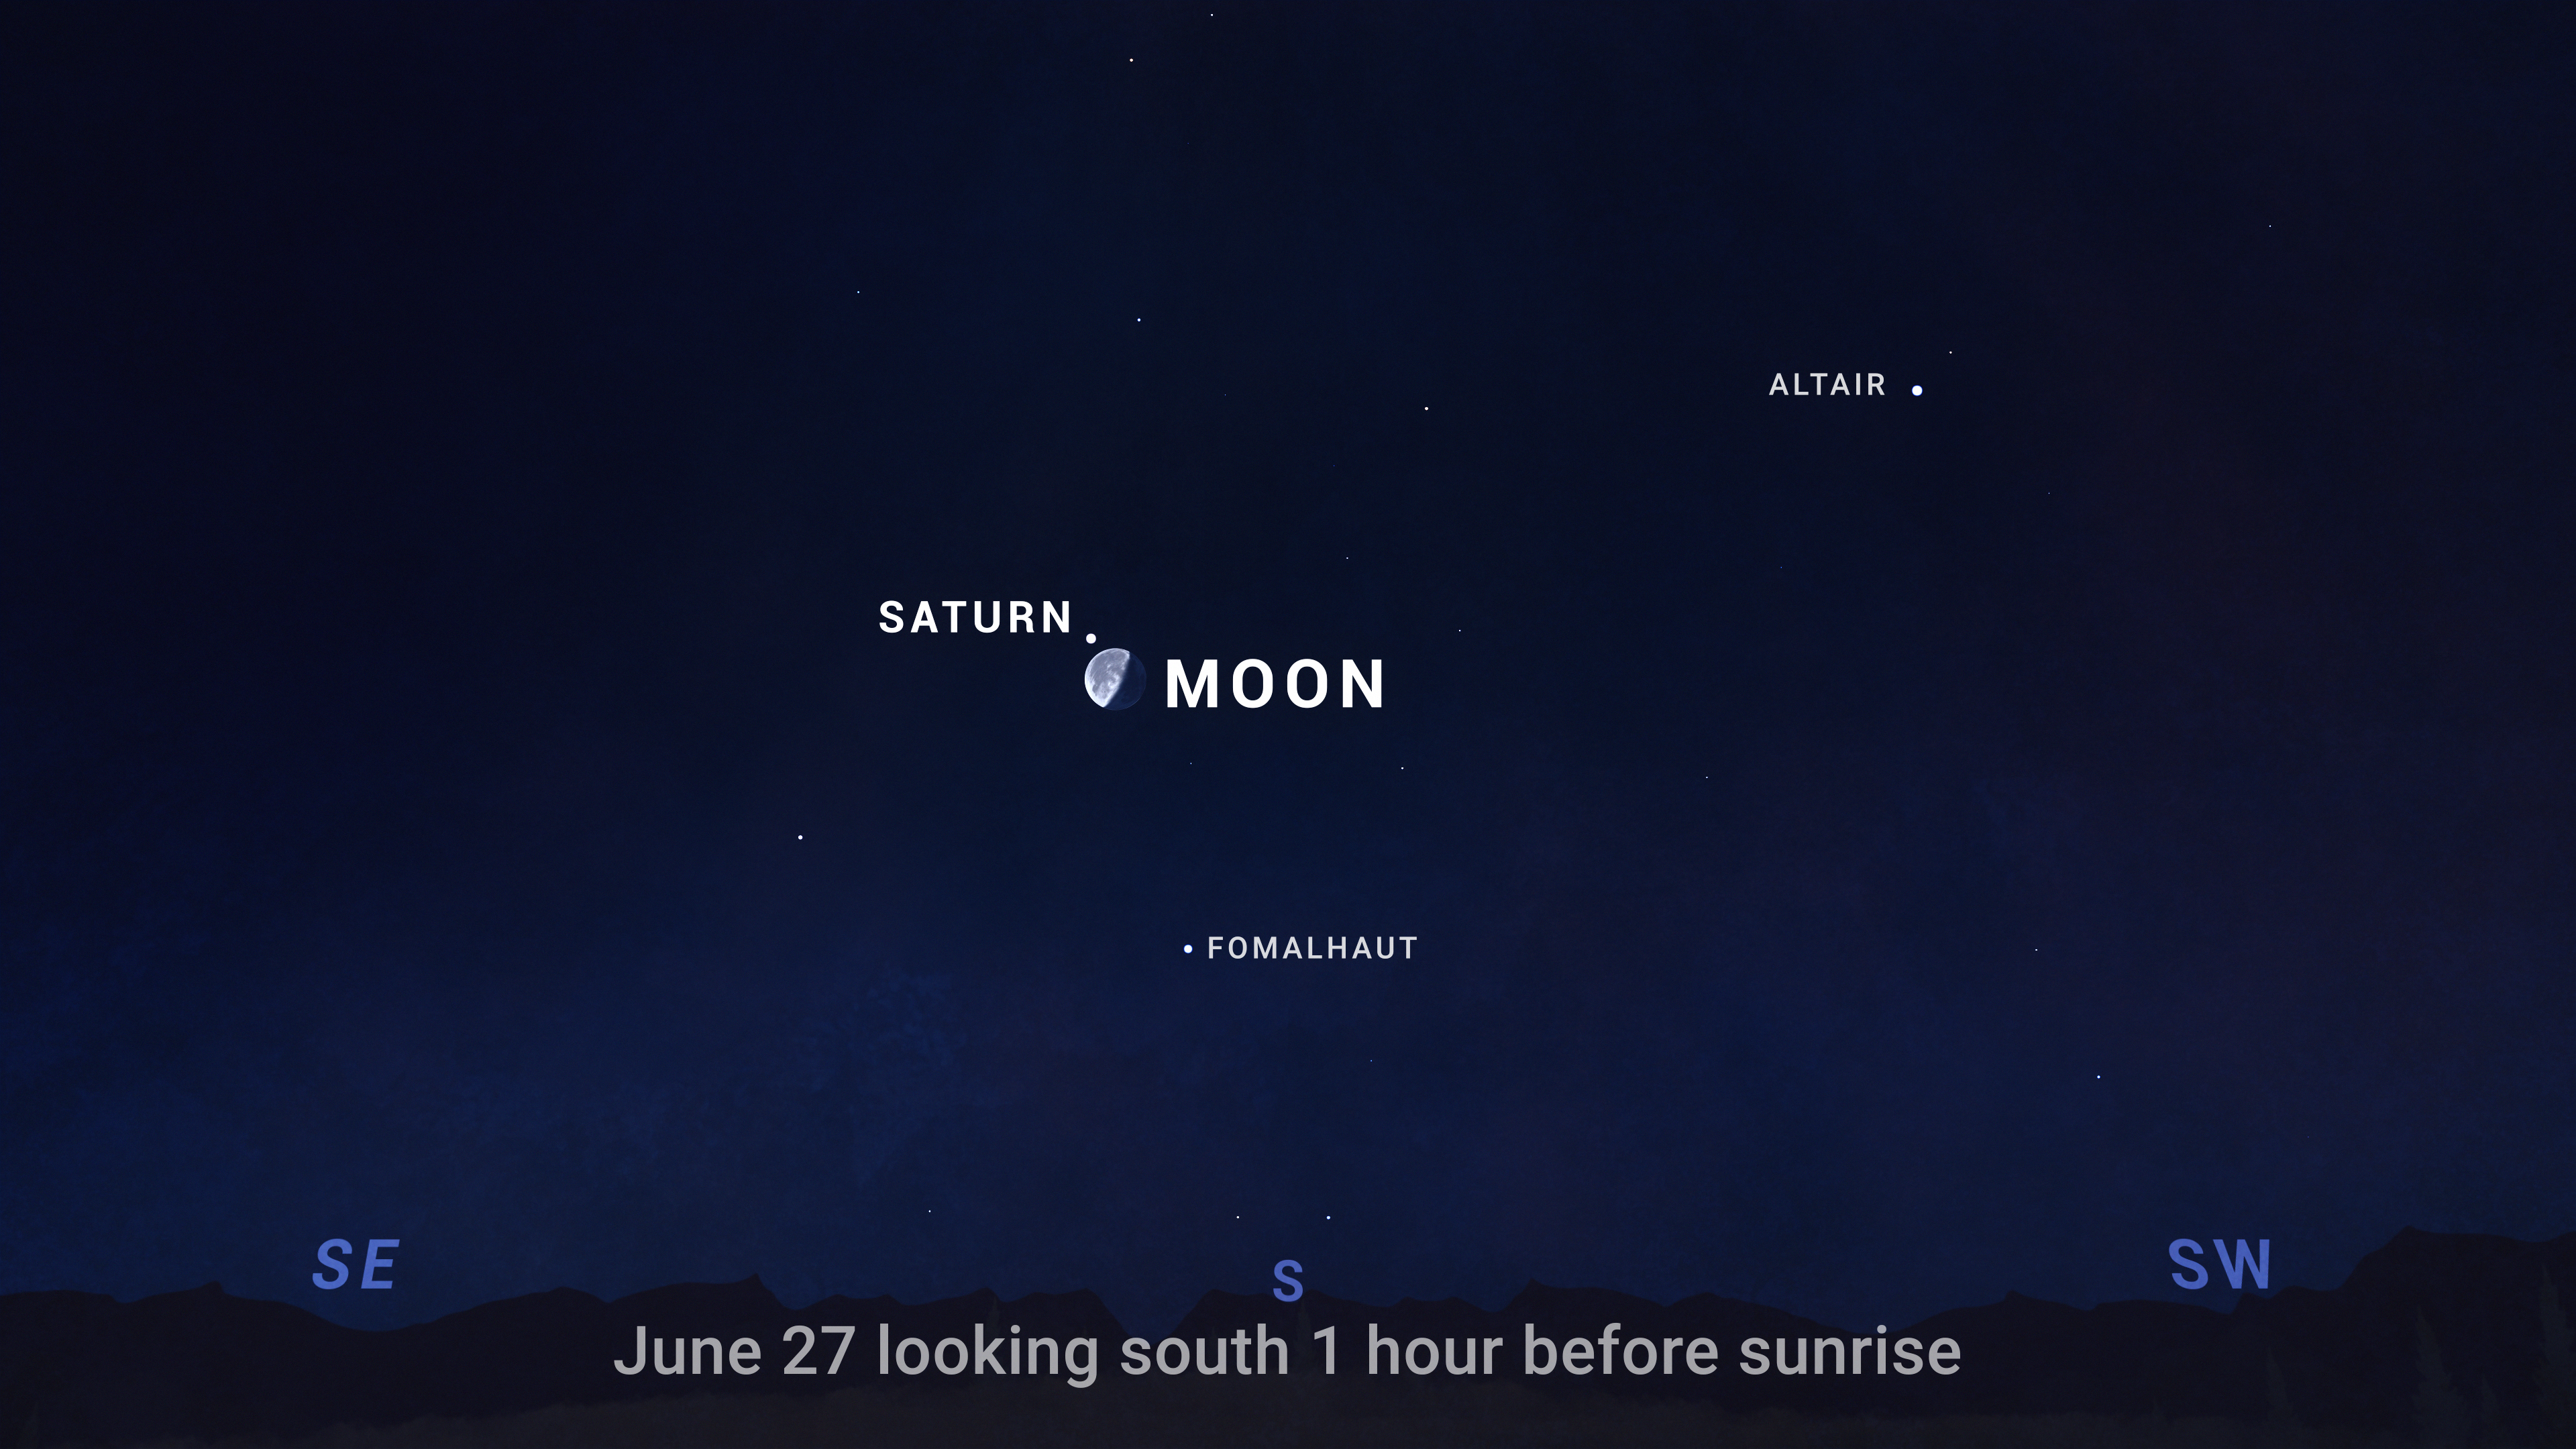 An illustrated sky chart shows the morning sky facing eastward, 1 hour before sunrise on June 3, 2024. The planets Mars and Saturn are pictured as small white dots. Mars is low in the sky, below center. Saturn appears higher, right of center. The crescent Moon also sits low in the sky, below and to the left of Mars. The bright star Fomalhaut is seen at far right, halfway up the sky.